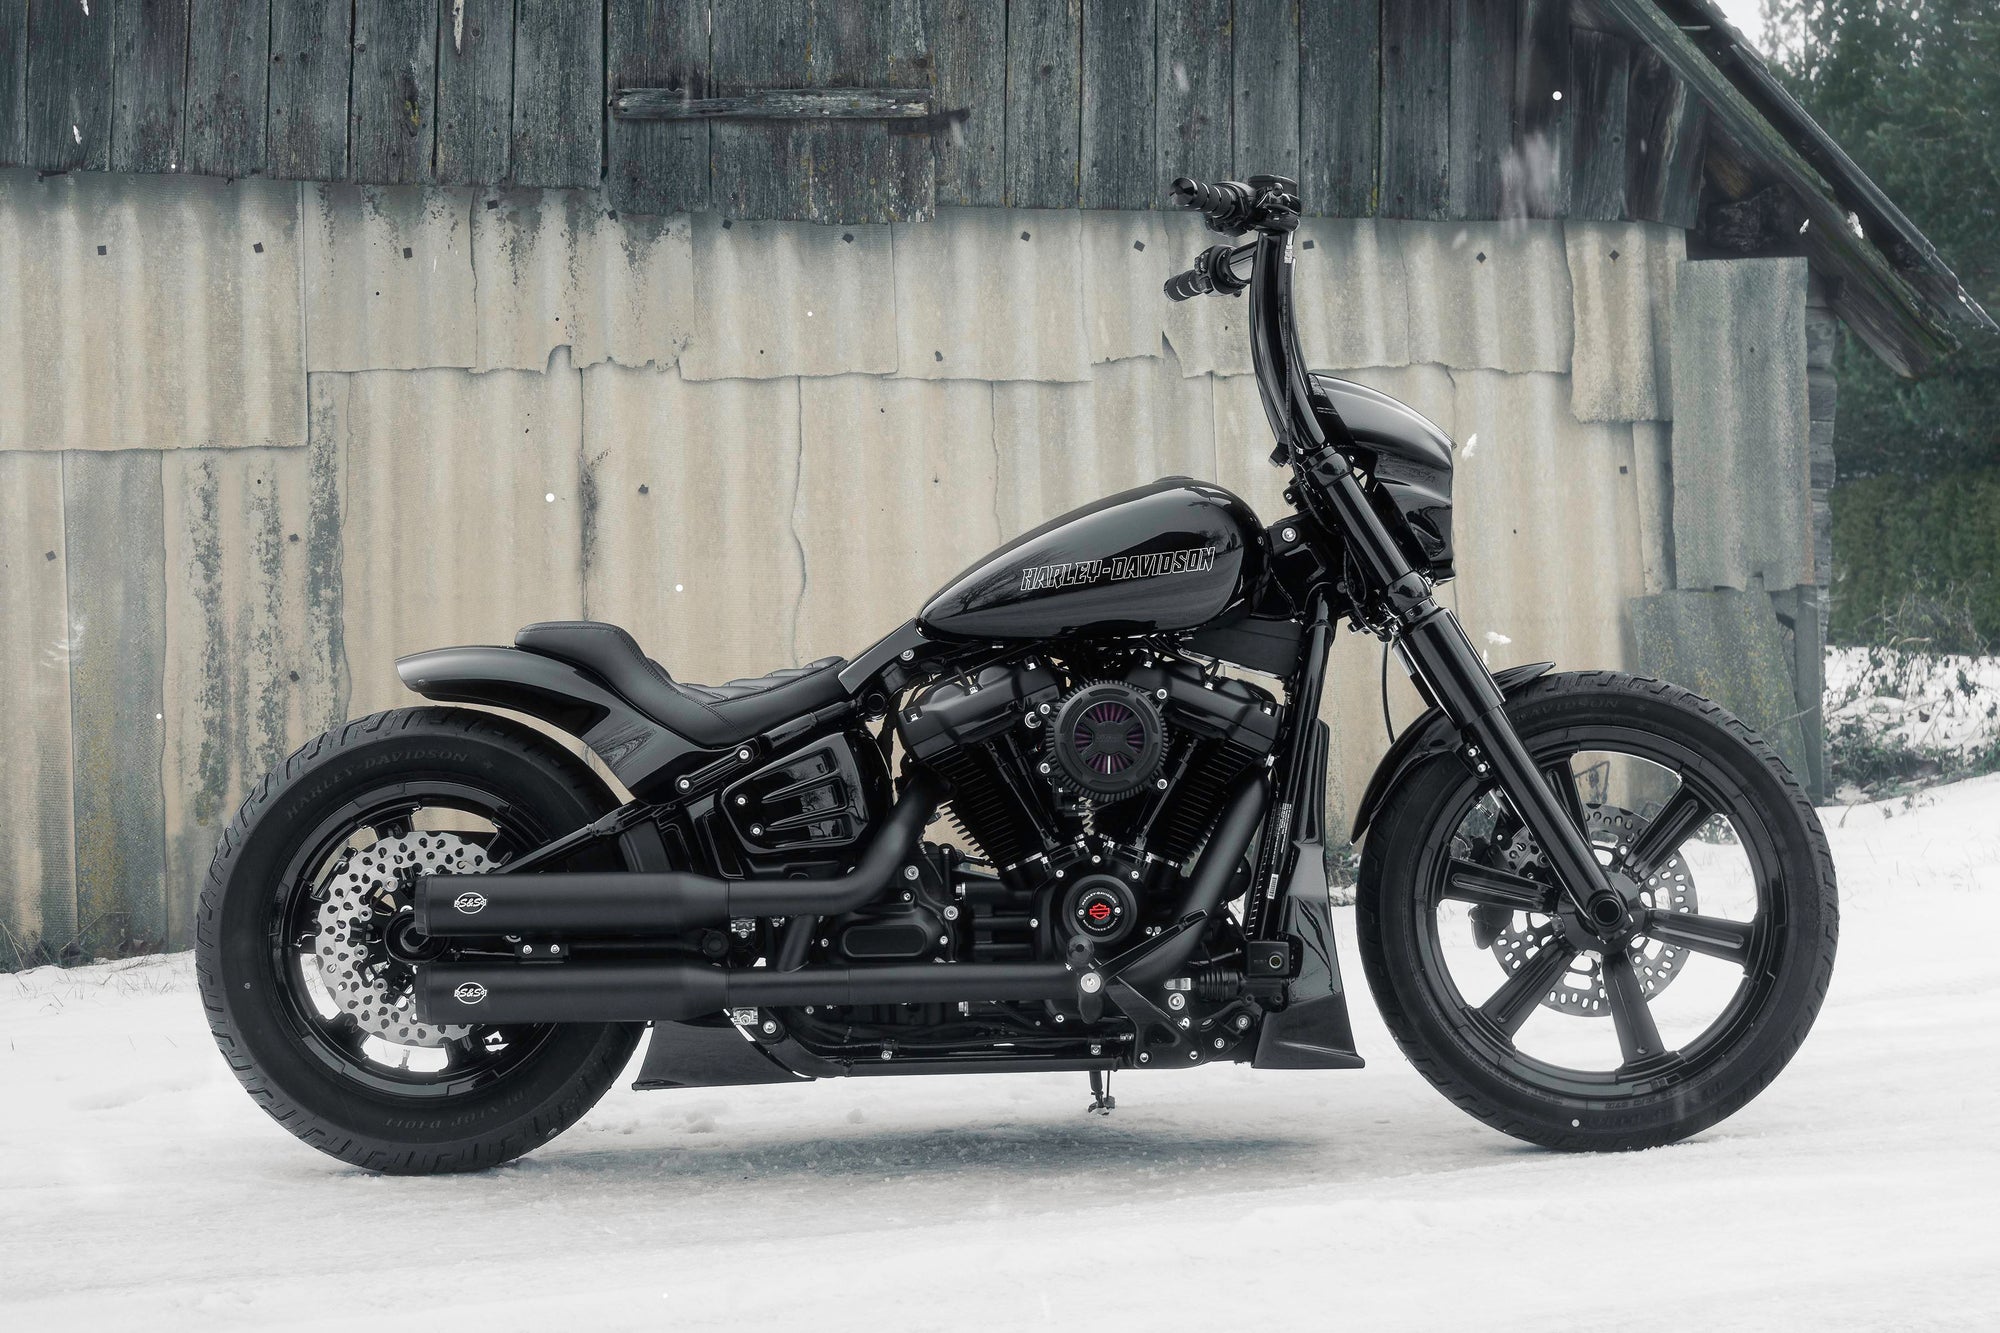 Modified Harley Davidson Softail motorcycle with Killer Custom parts from the side outside on a snowy day with an abandoned shack in the background